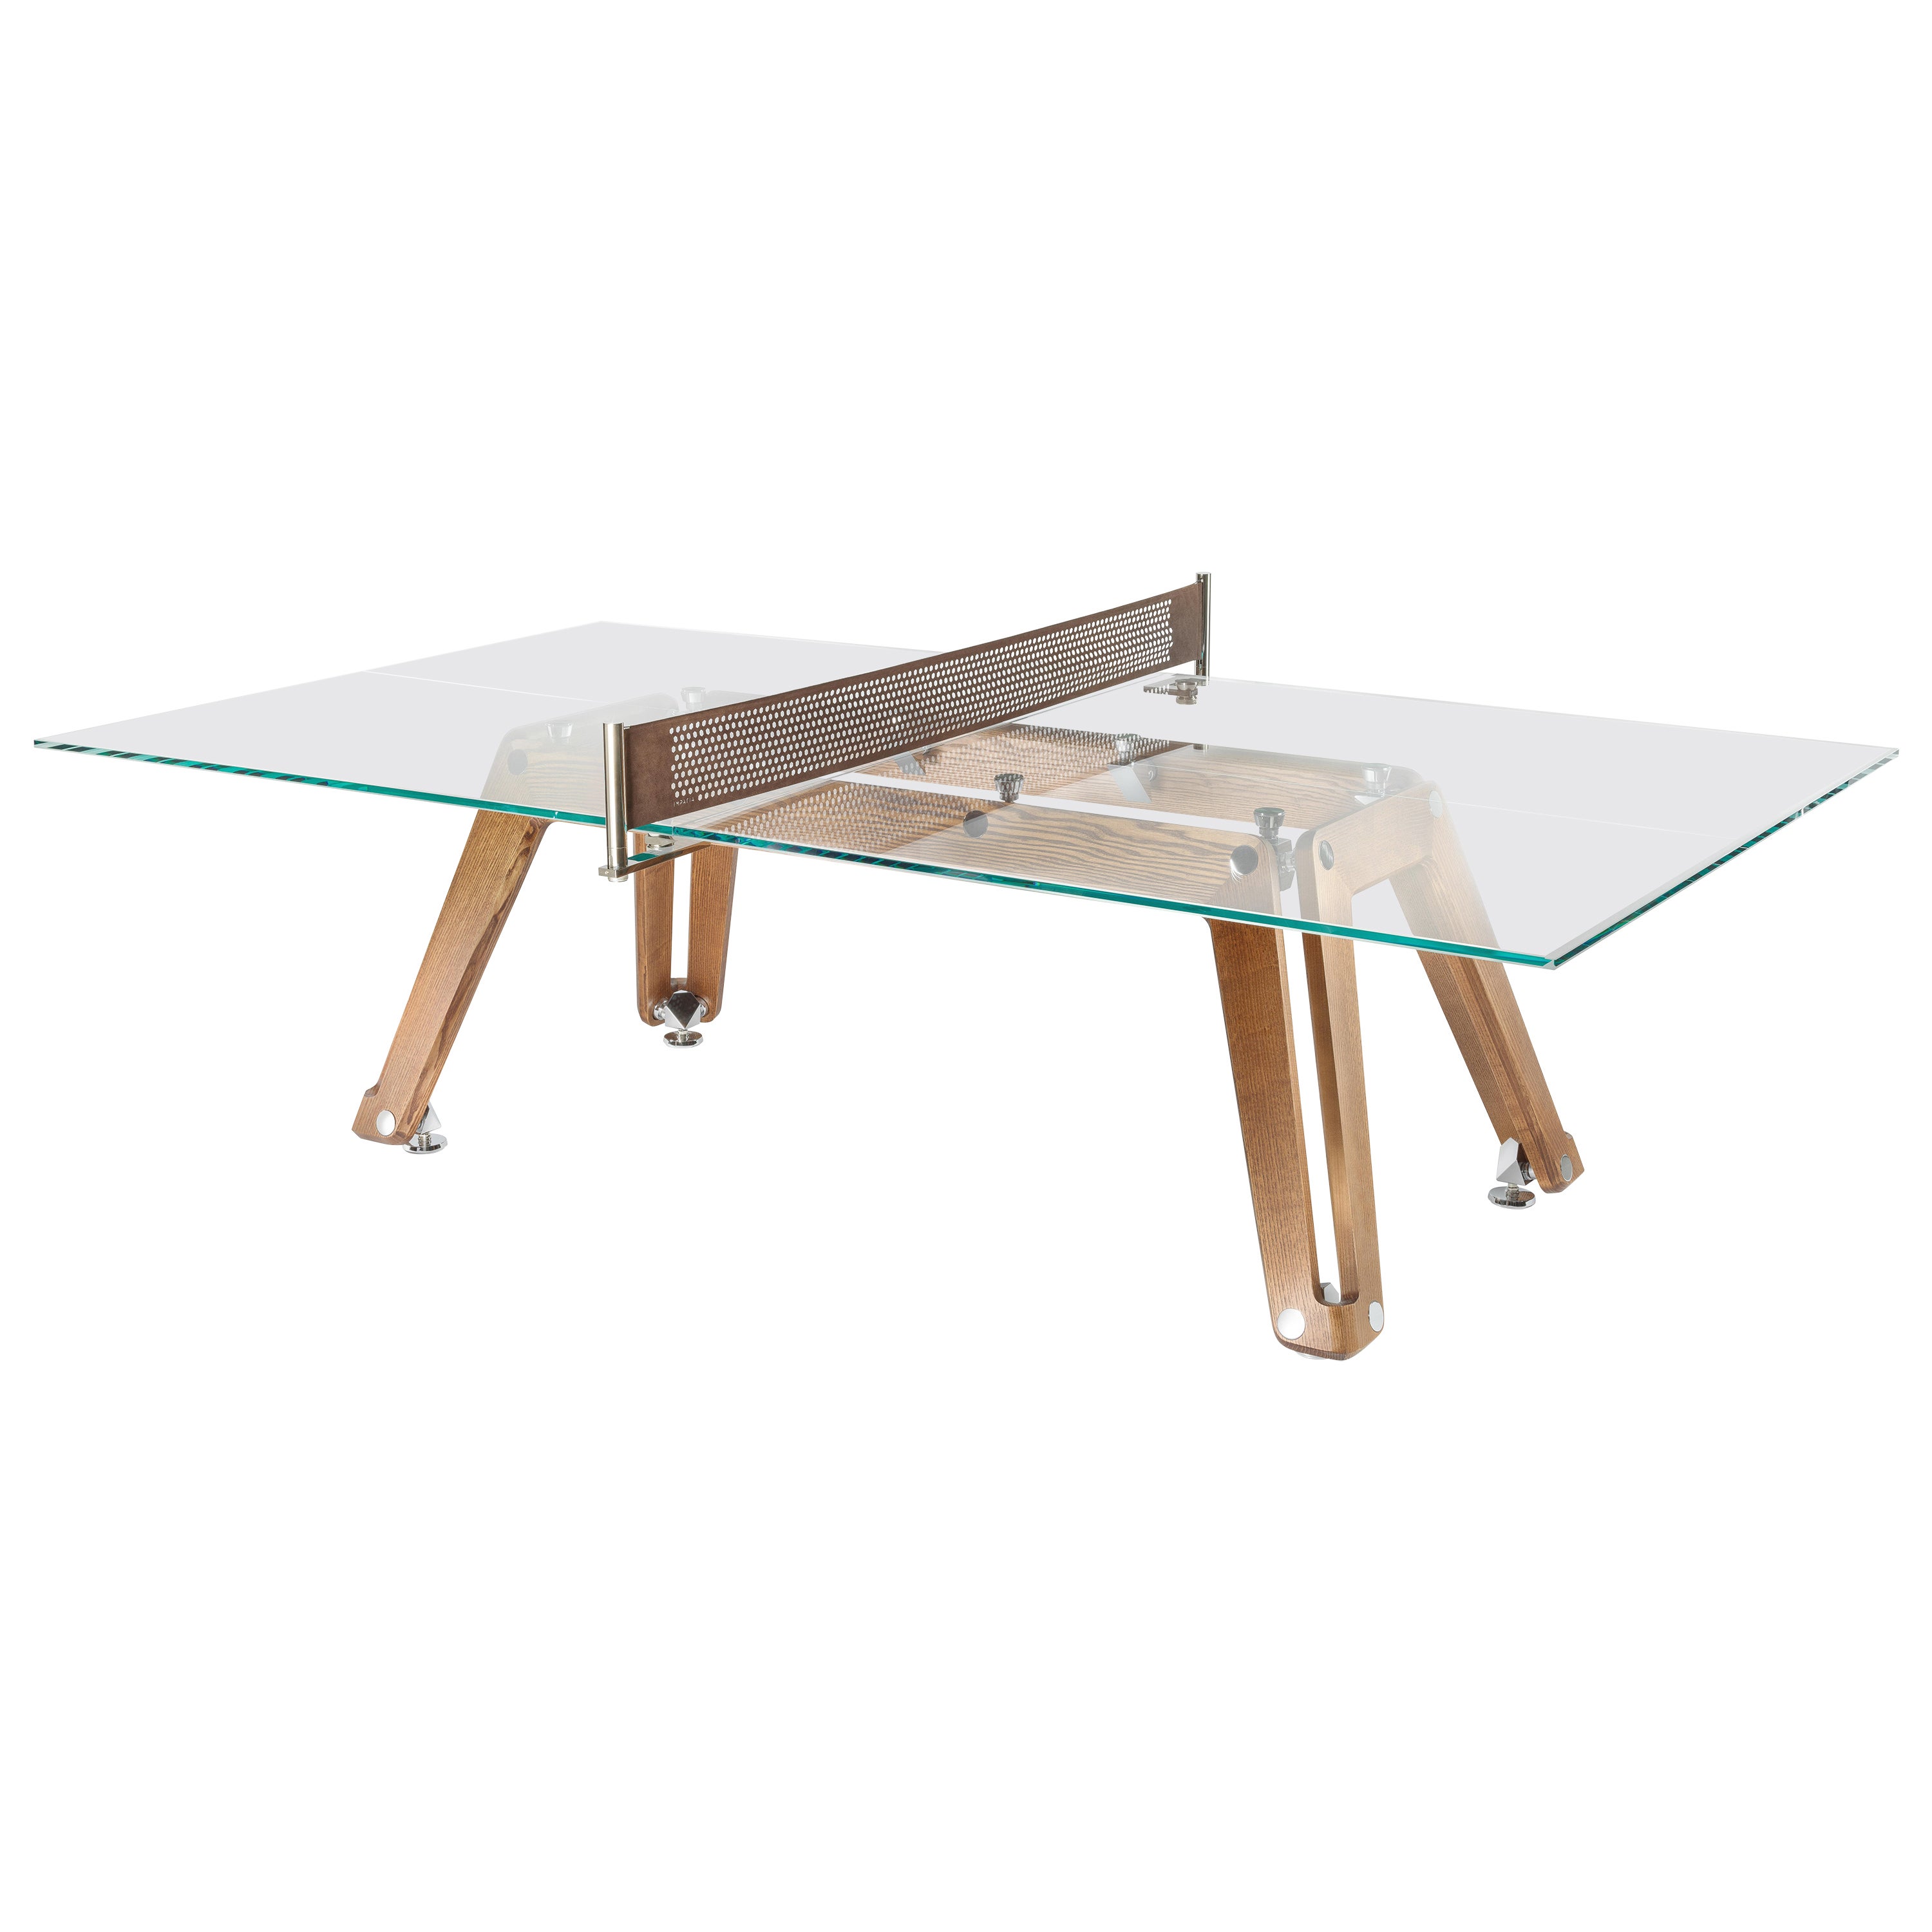 Lungolinea Wood Table Tennis by Impatia